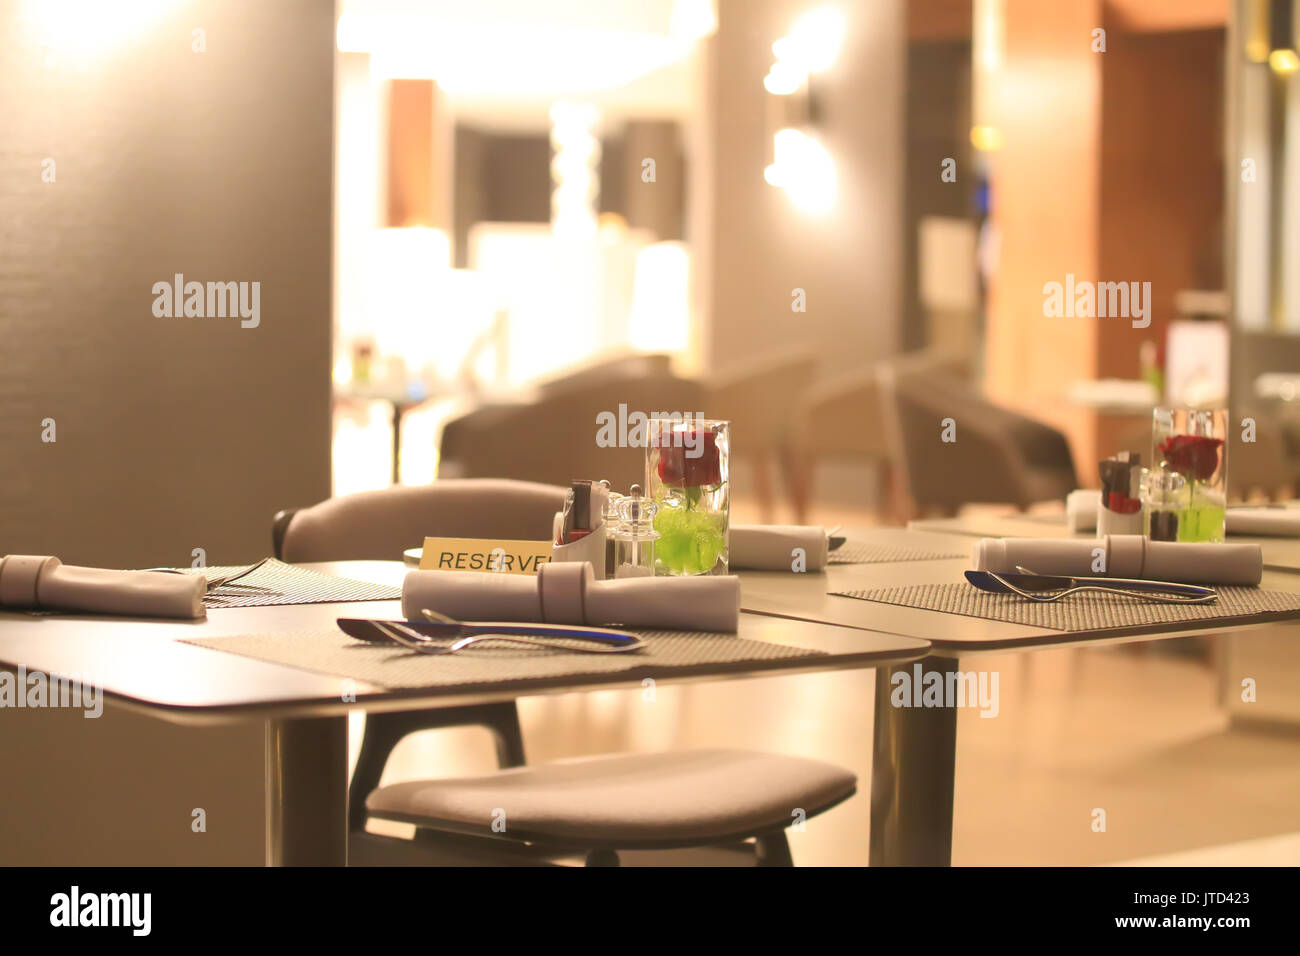 Reserved table in restaraunt close-up. Beautiful restaraunt interior in evening light. Stock Photo